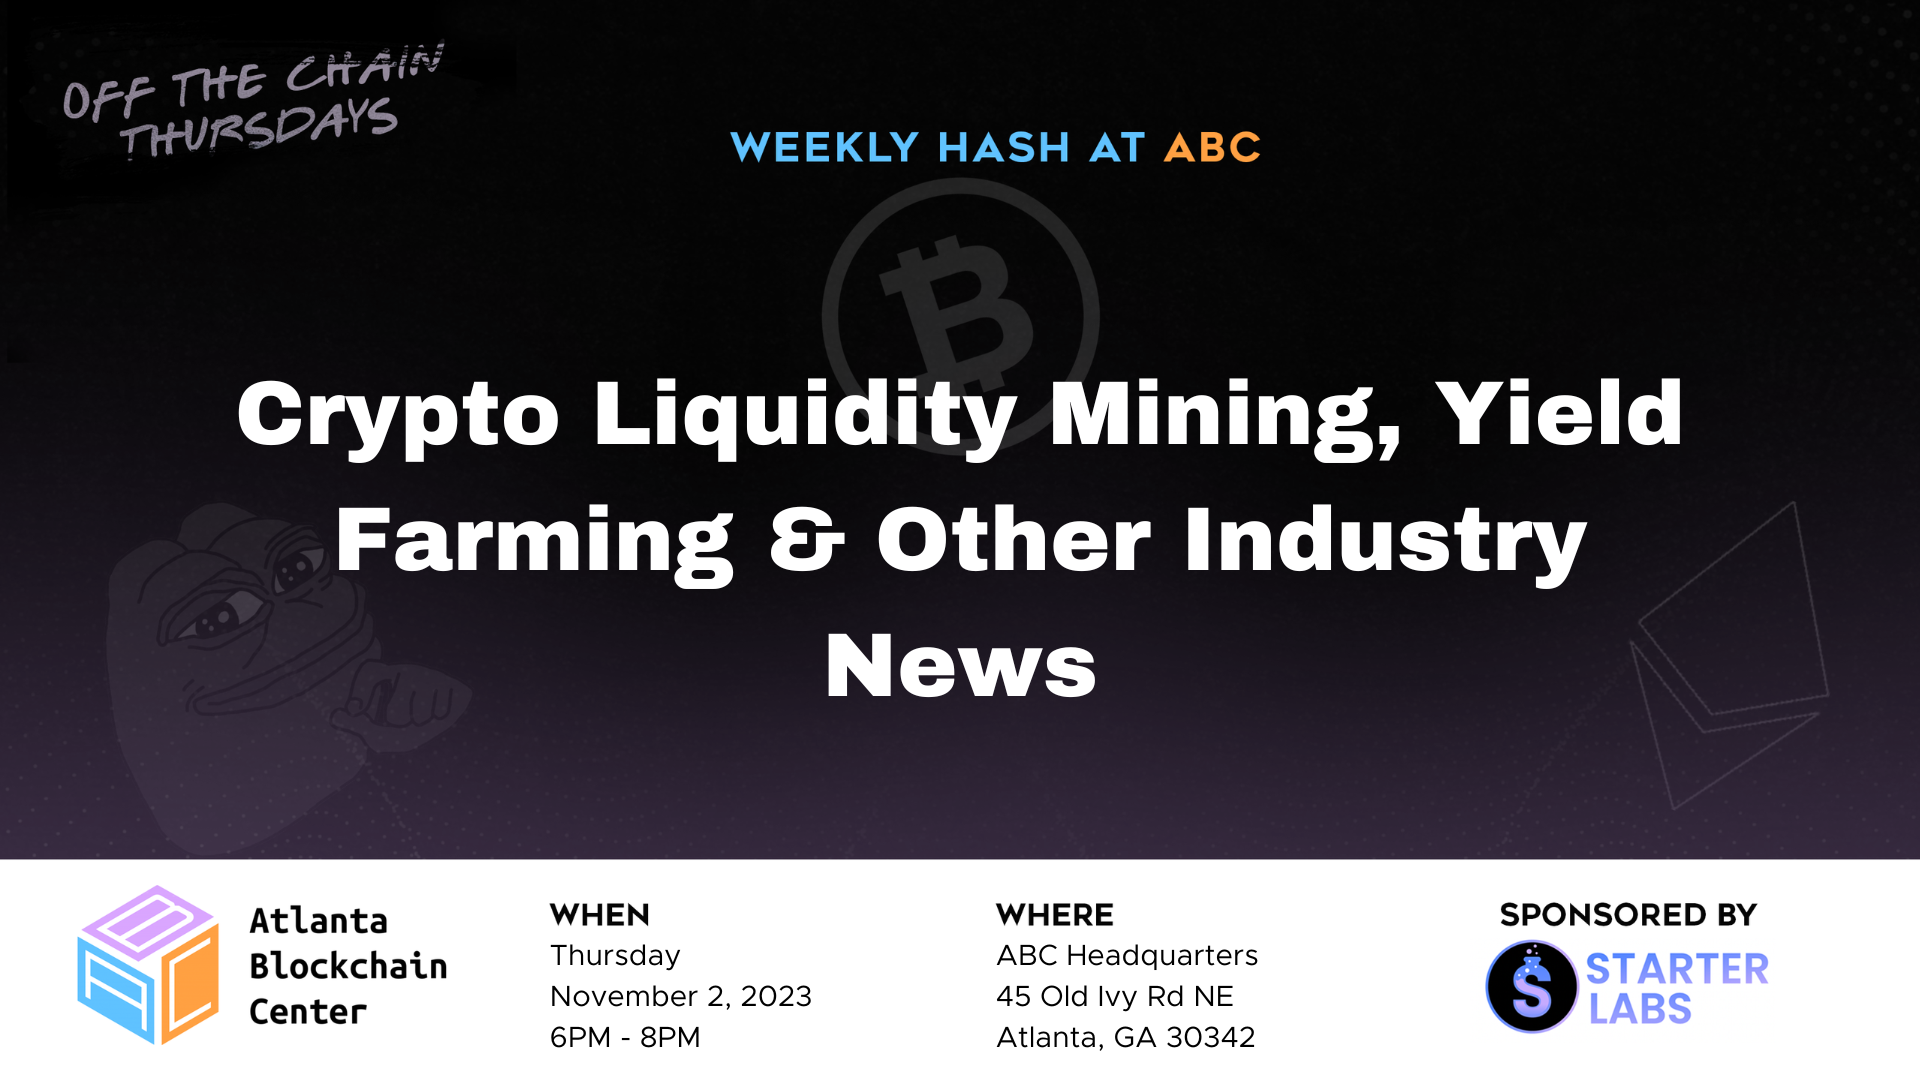 Weekly Hash @ ABC – Crypto Liquidity Mining, Yield Farming & Other Industry News